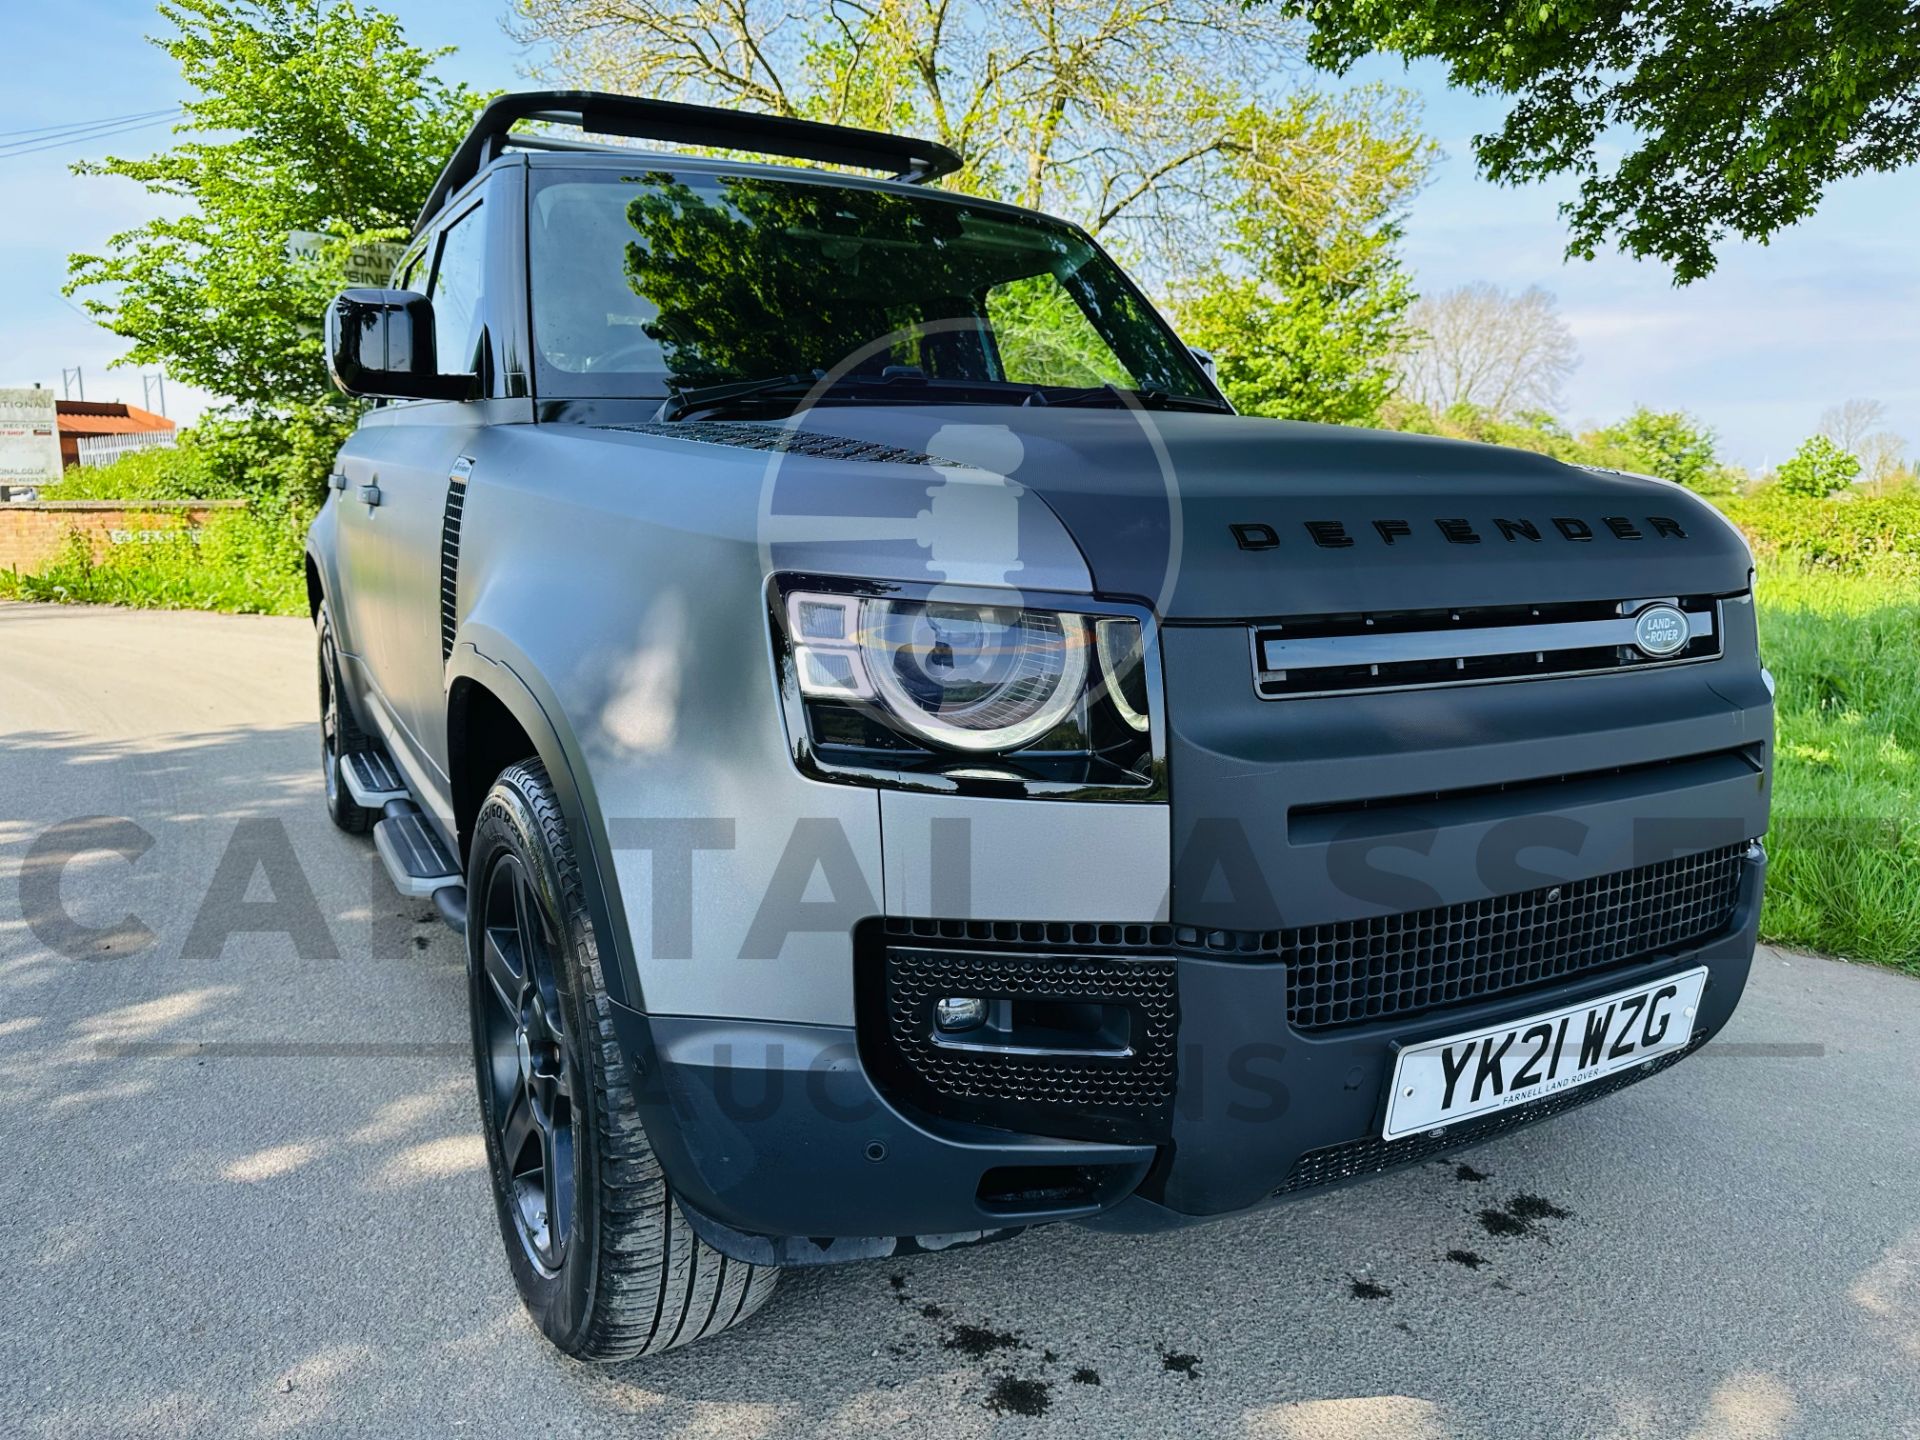 (On Sale) LAND ROVER DEFENDER 110 *SE EDITION* 7 SEATER SUV (2021) D300 - 8 SPEED AUTO *HUGE SPEC* - Image 3 of 63